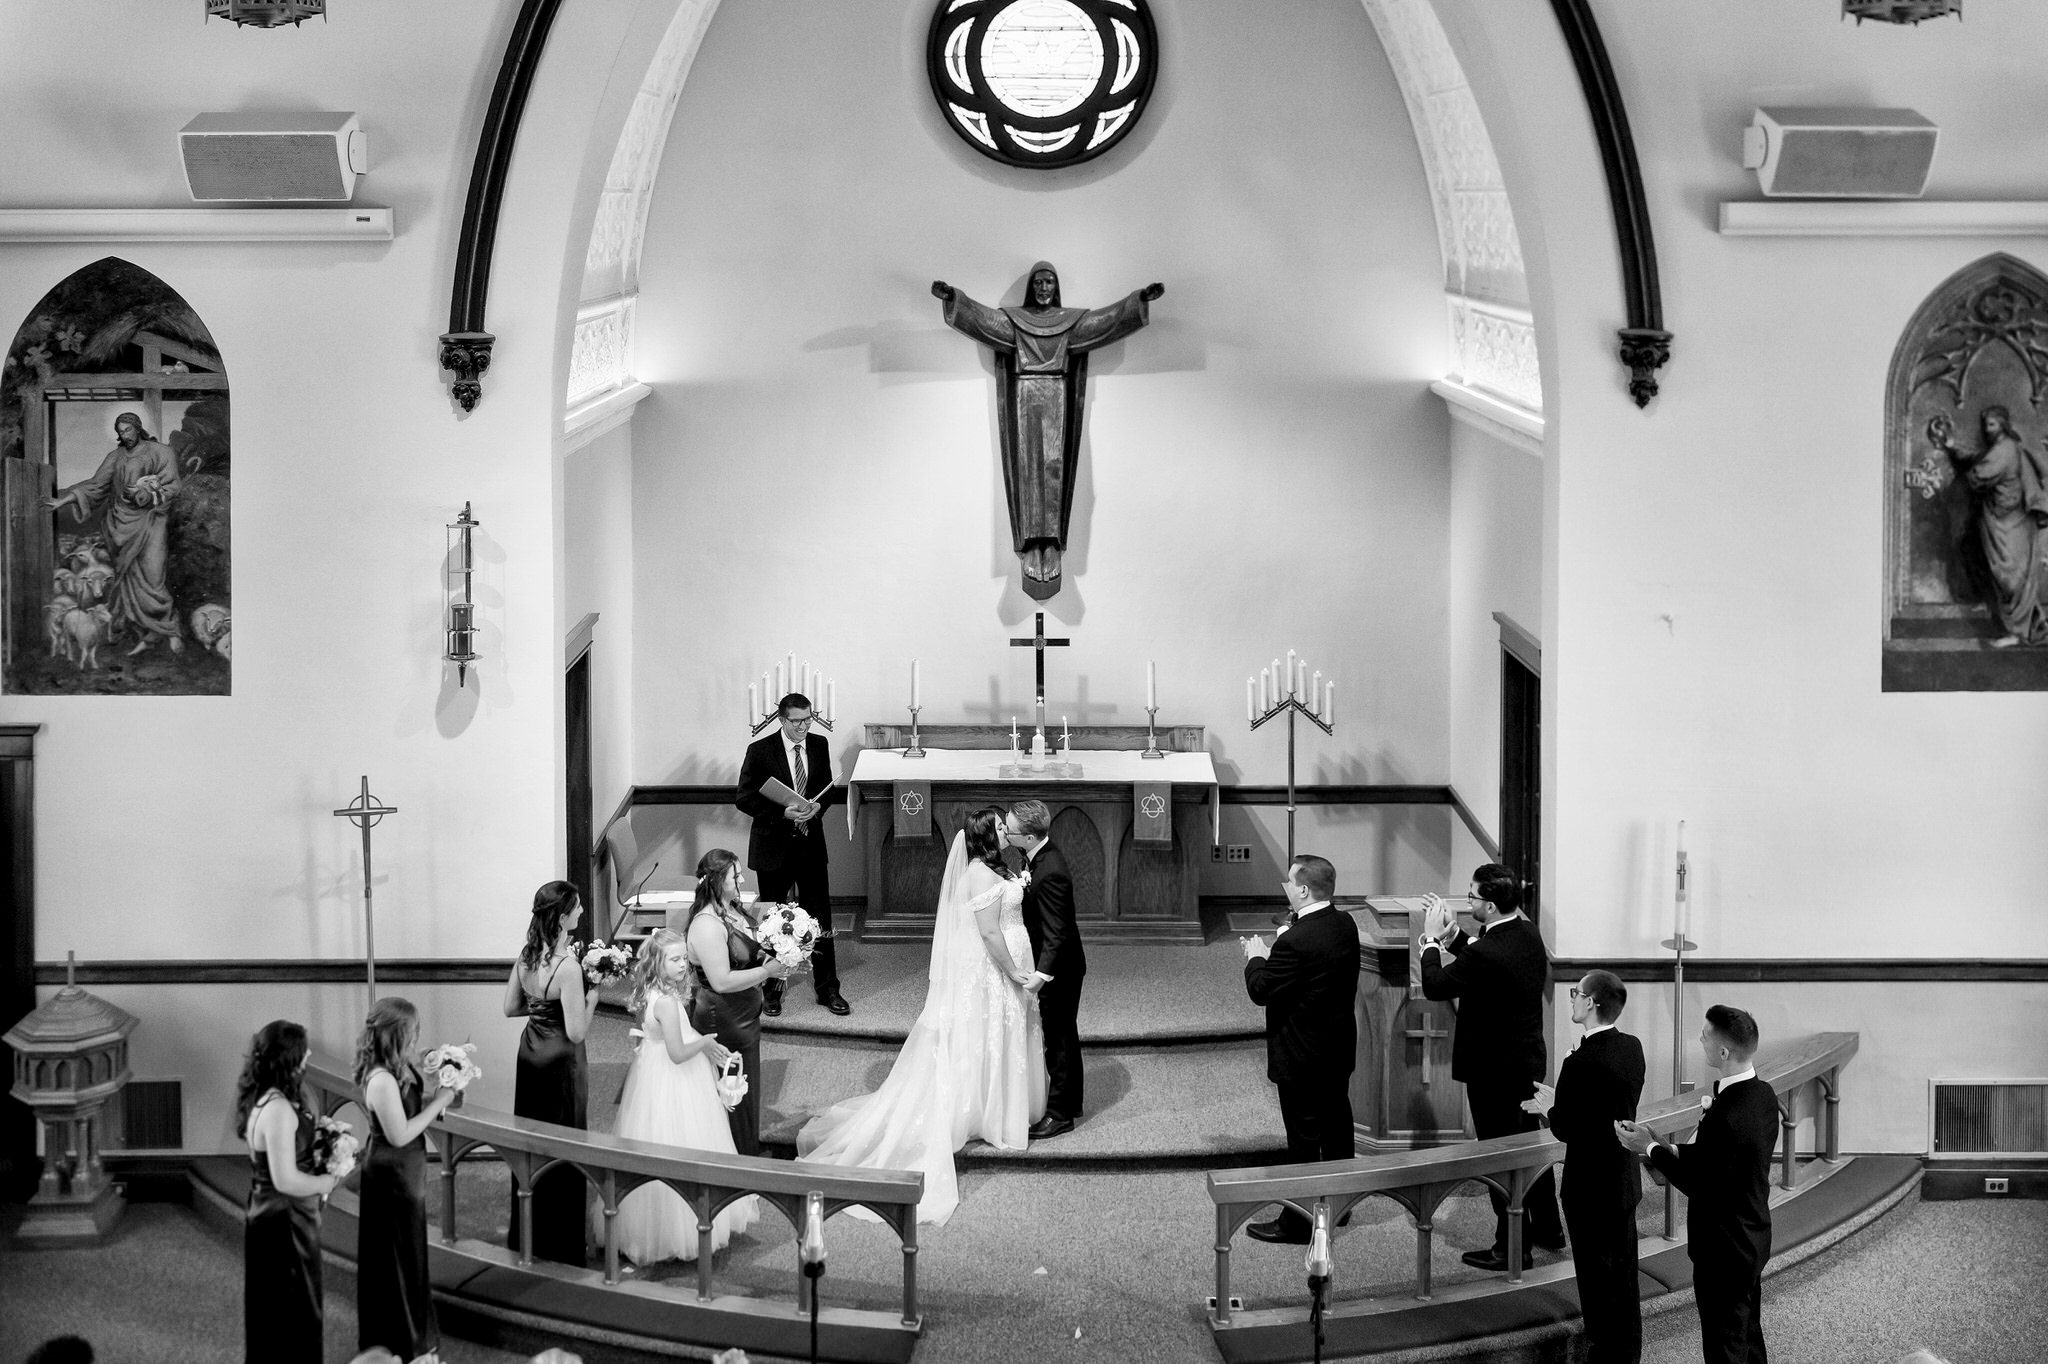 A shot from the balcony, the bride and groom kiss at the altar on their wedding day at Immanuel Lutheran Church in Macomb, MI. 